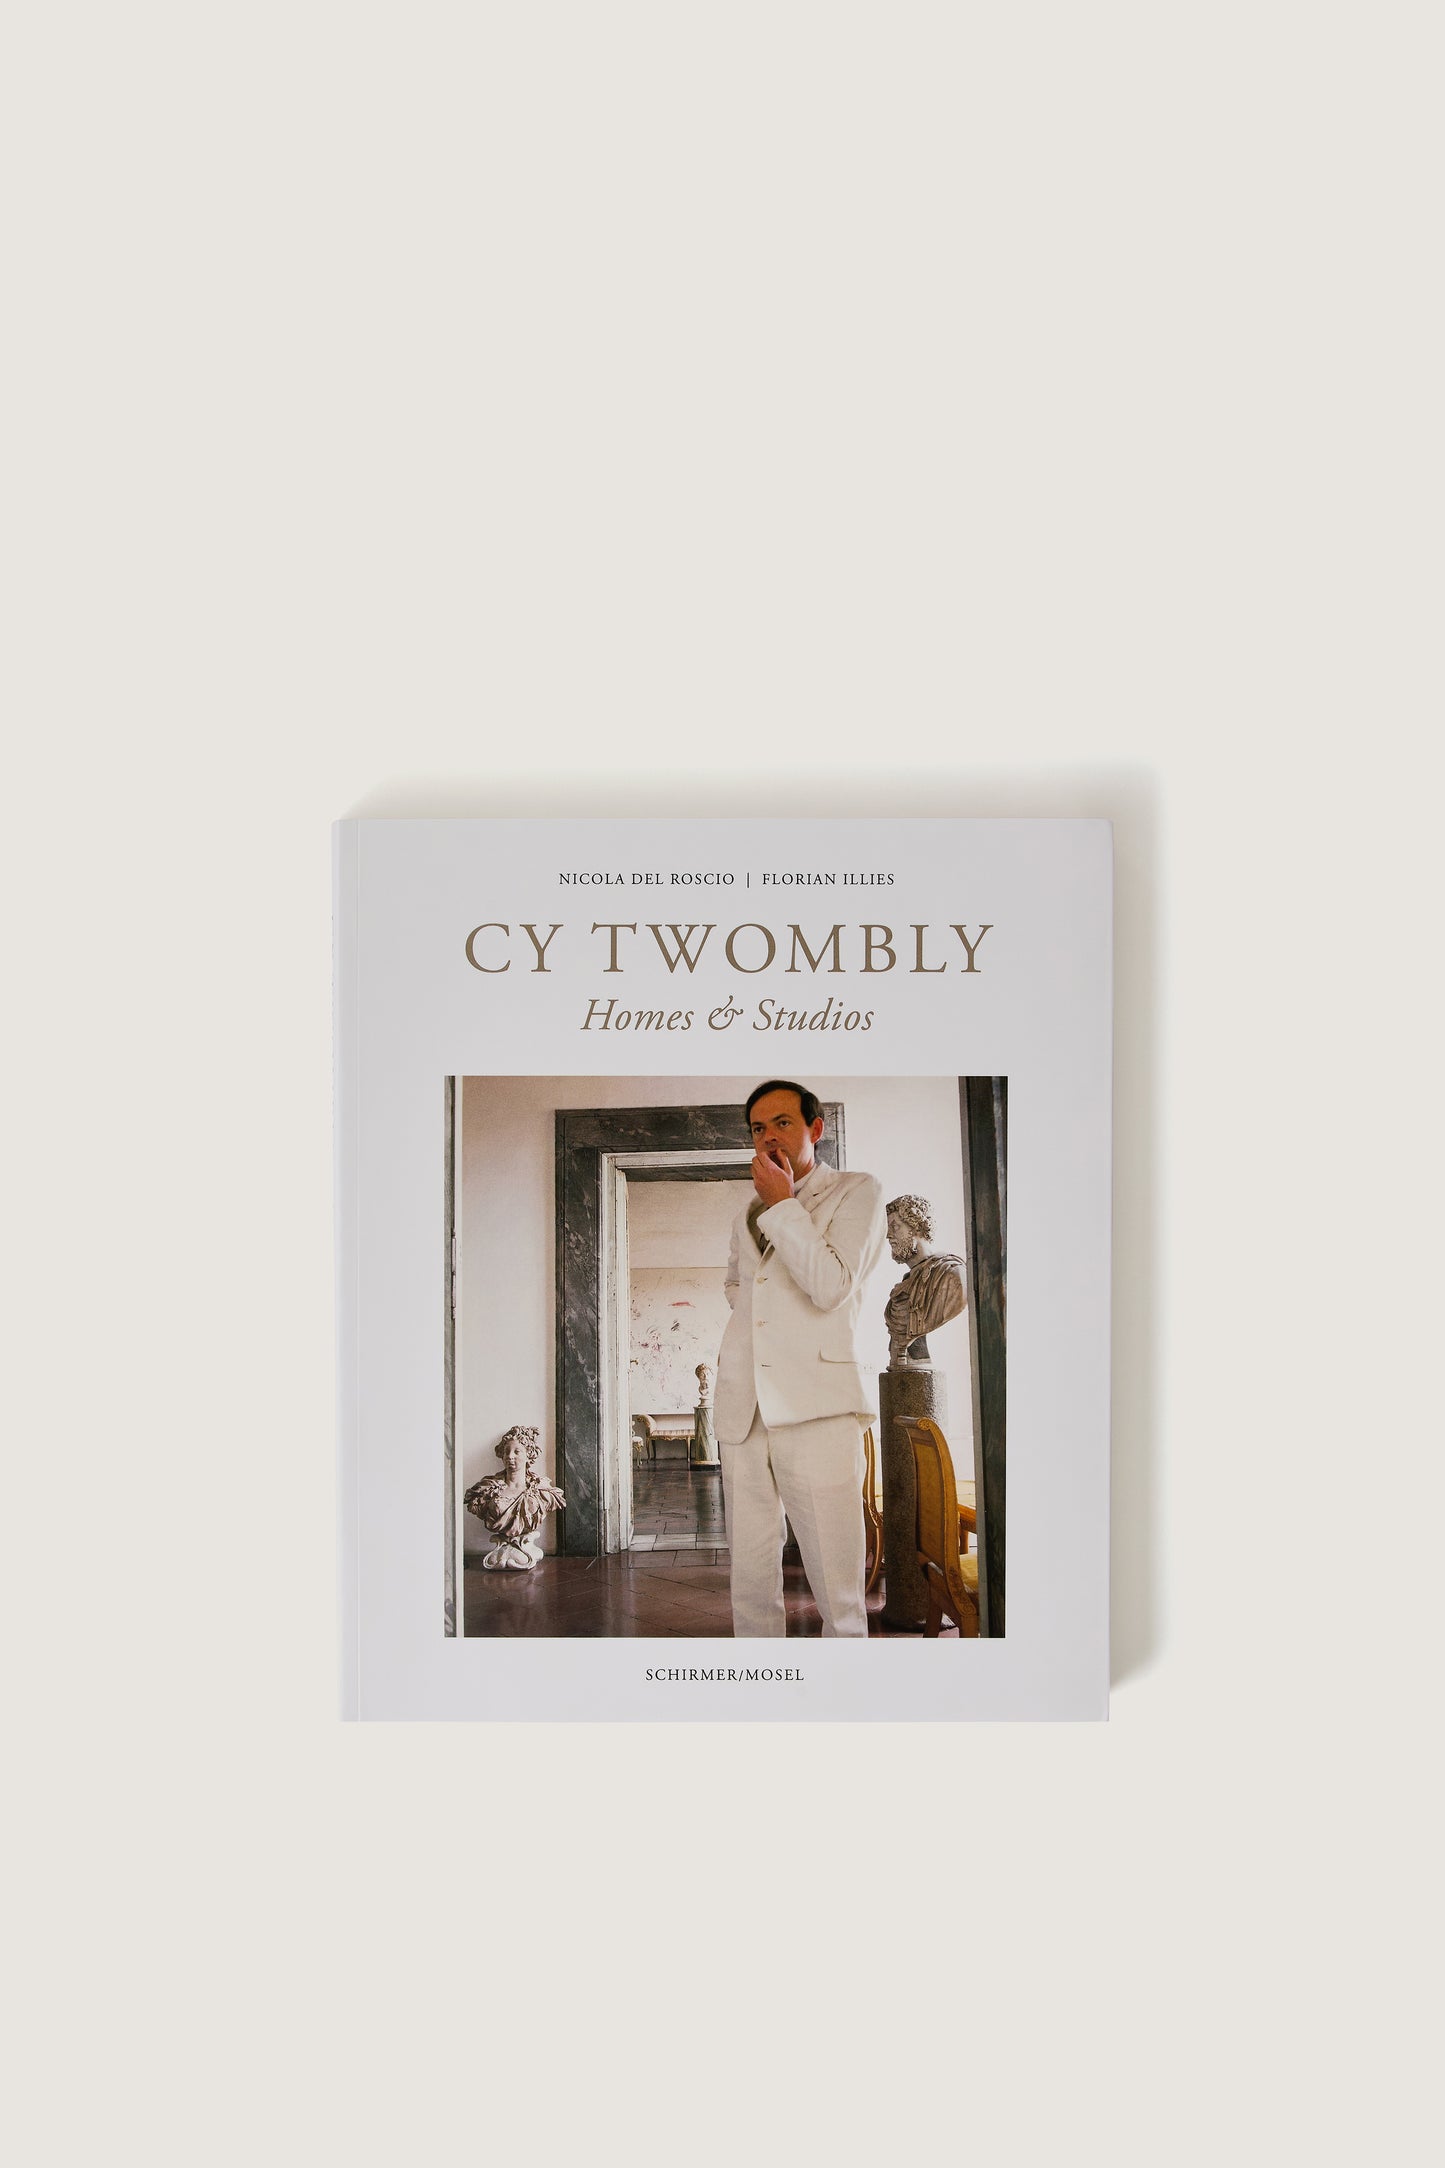 BOOK "CY TWOMBLY, HOMES AND STUDIOS"